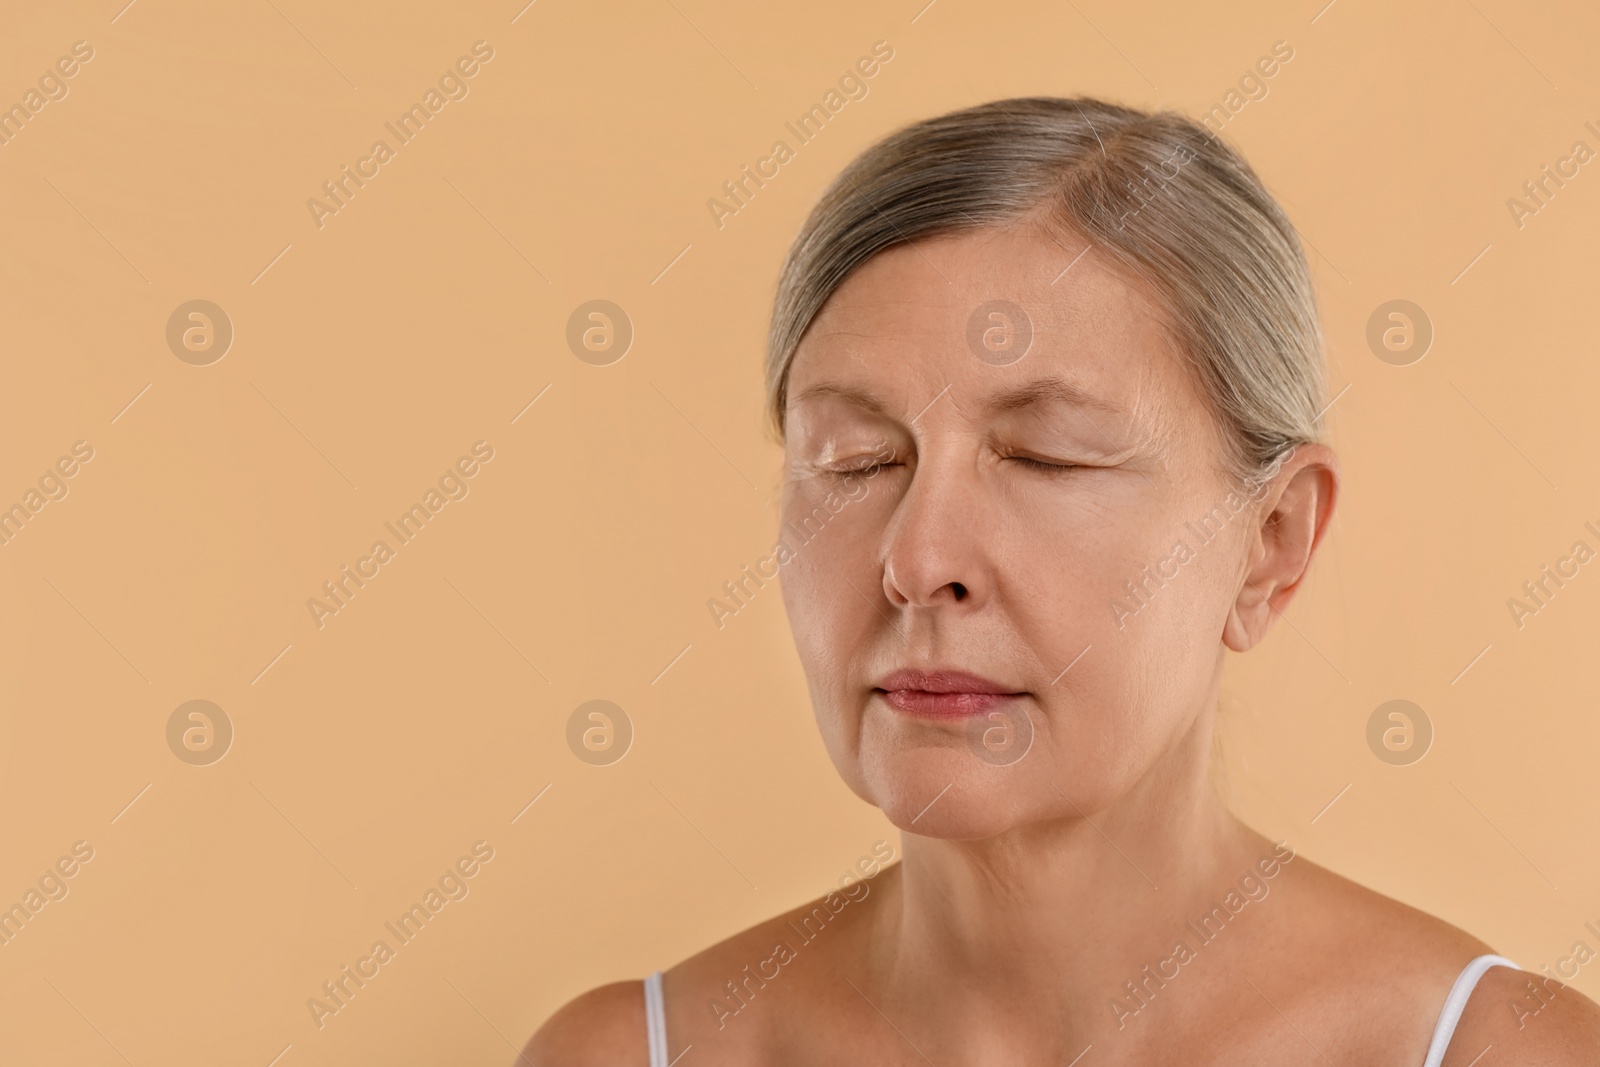 Photo of Woman with closed eyes on beige background, space for text